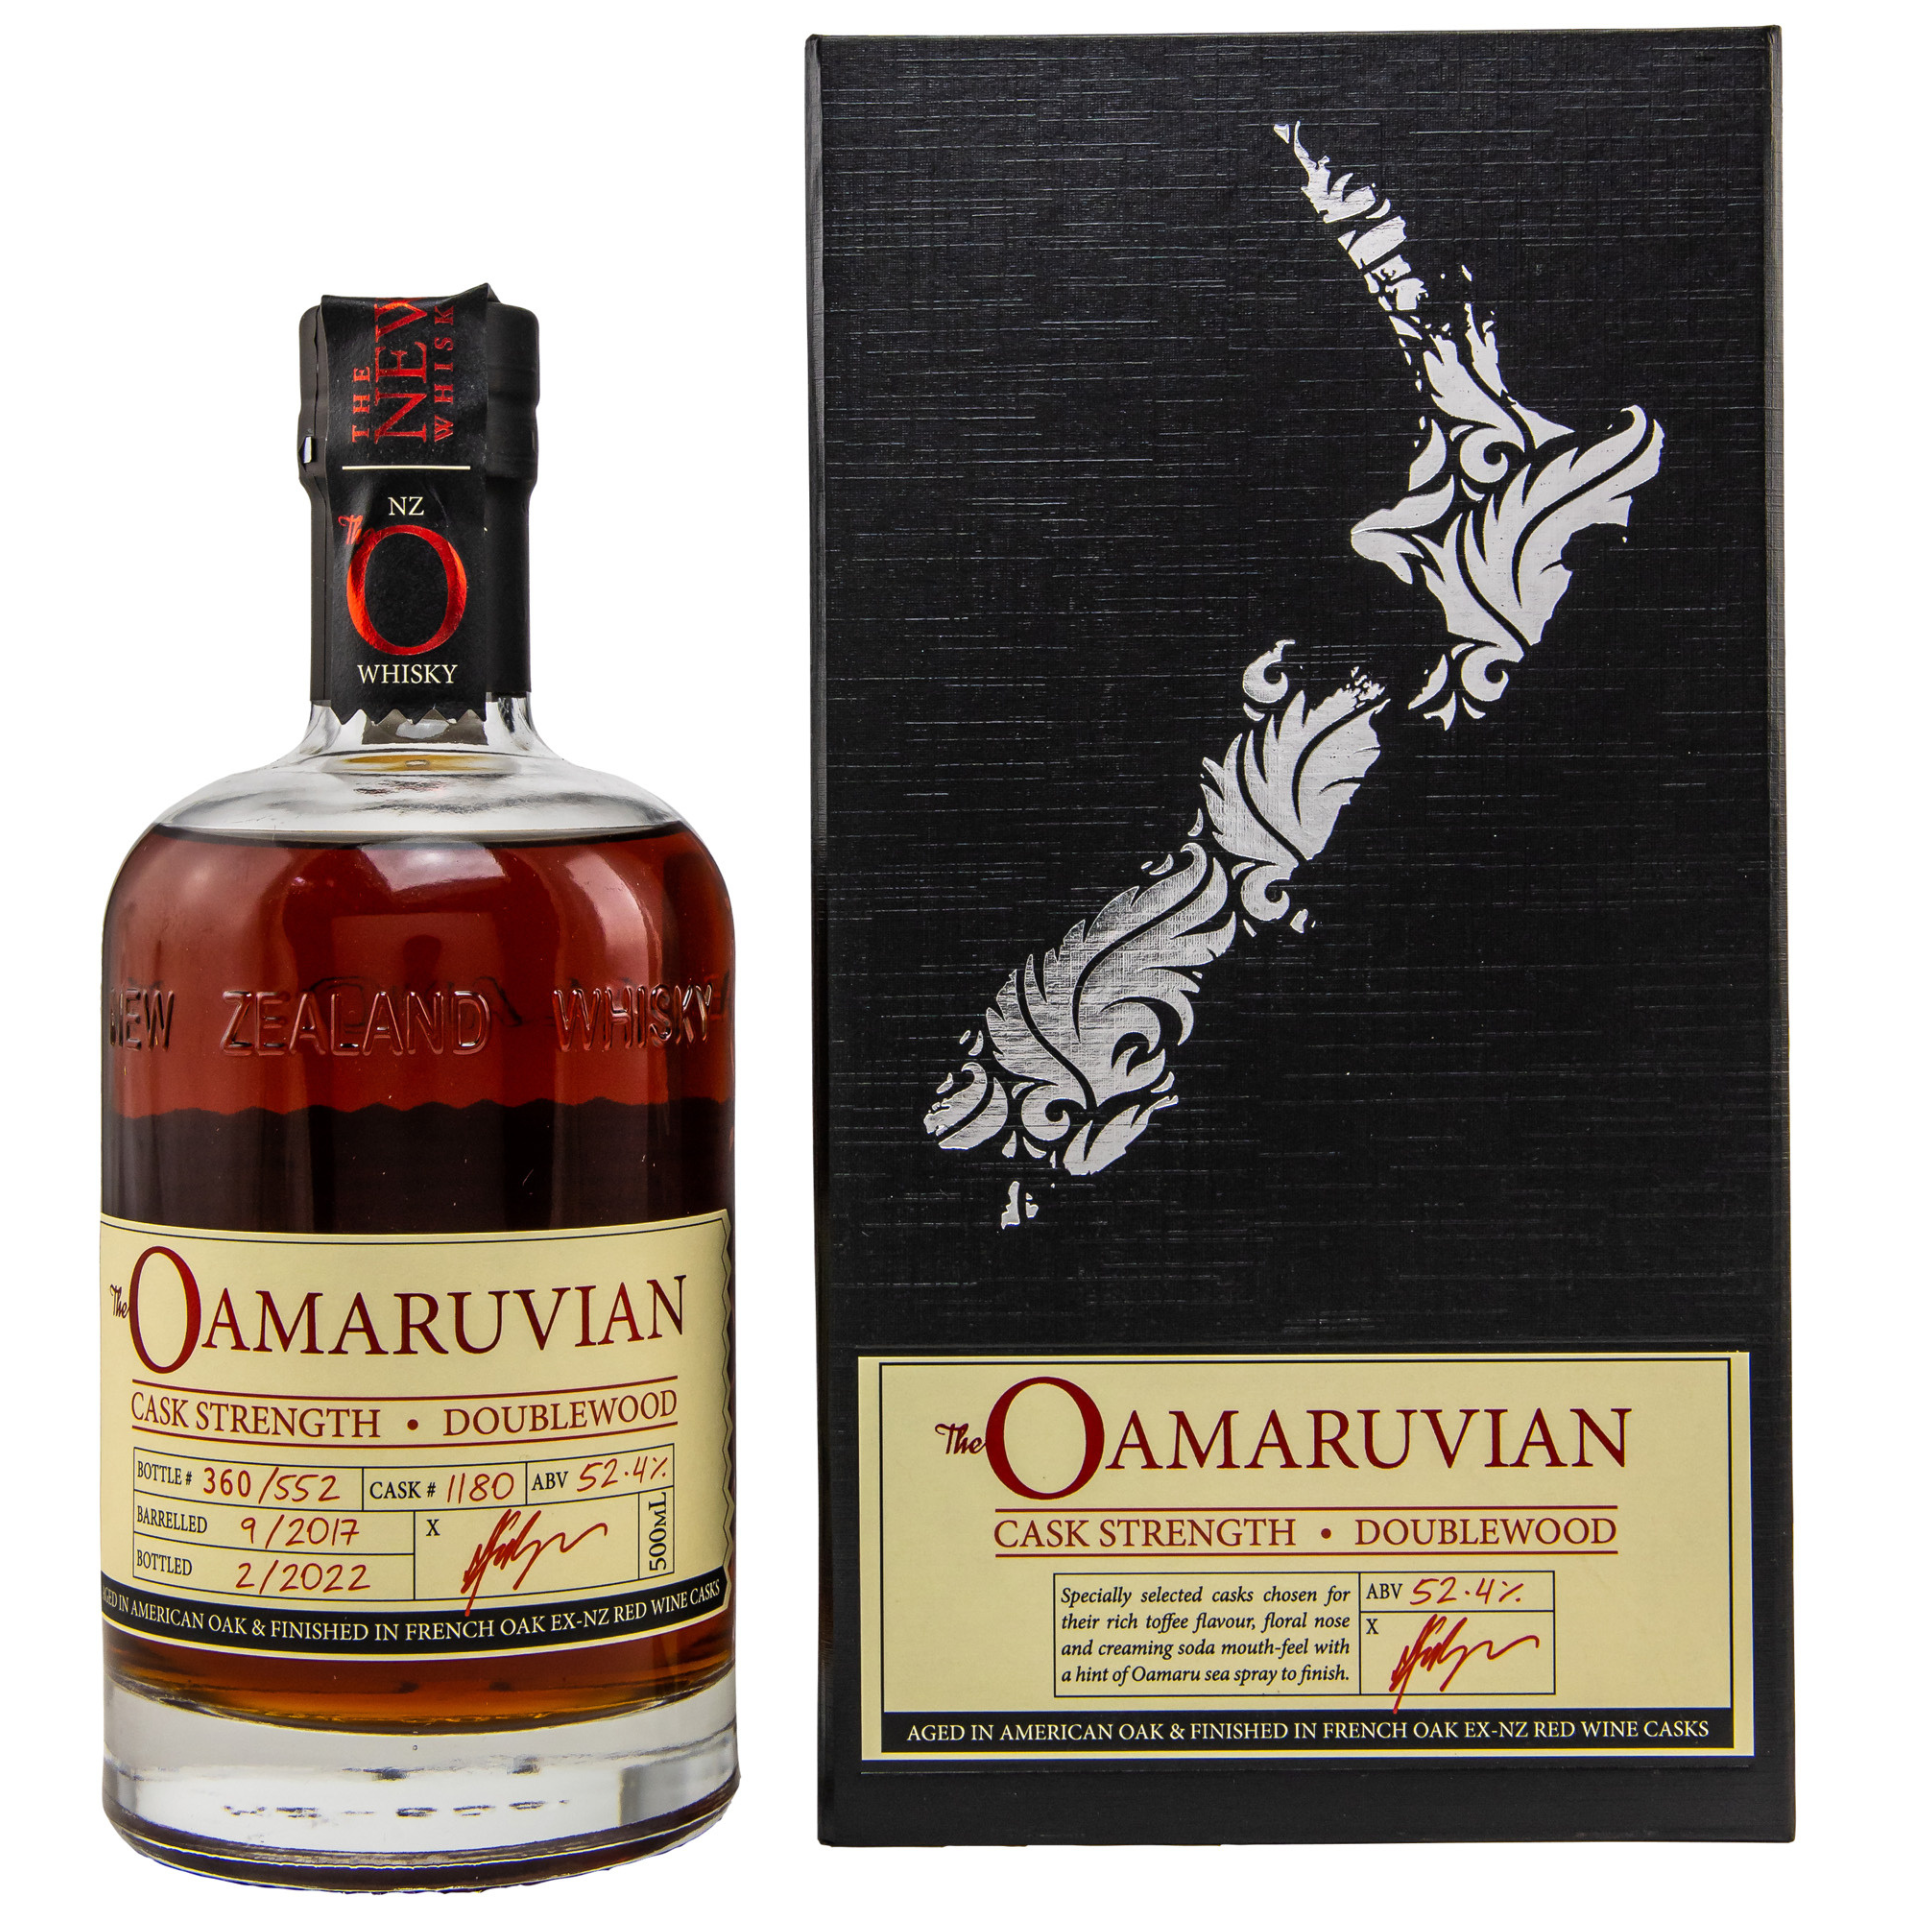 The New Zealand Whisky Collection The Oamaruvian Cask Strength Doublewood 52,4% 0,5l